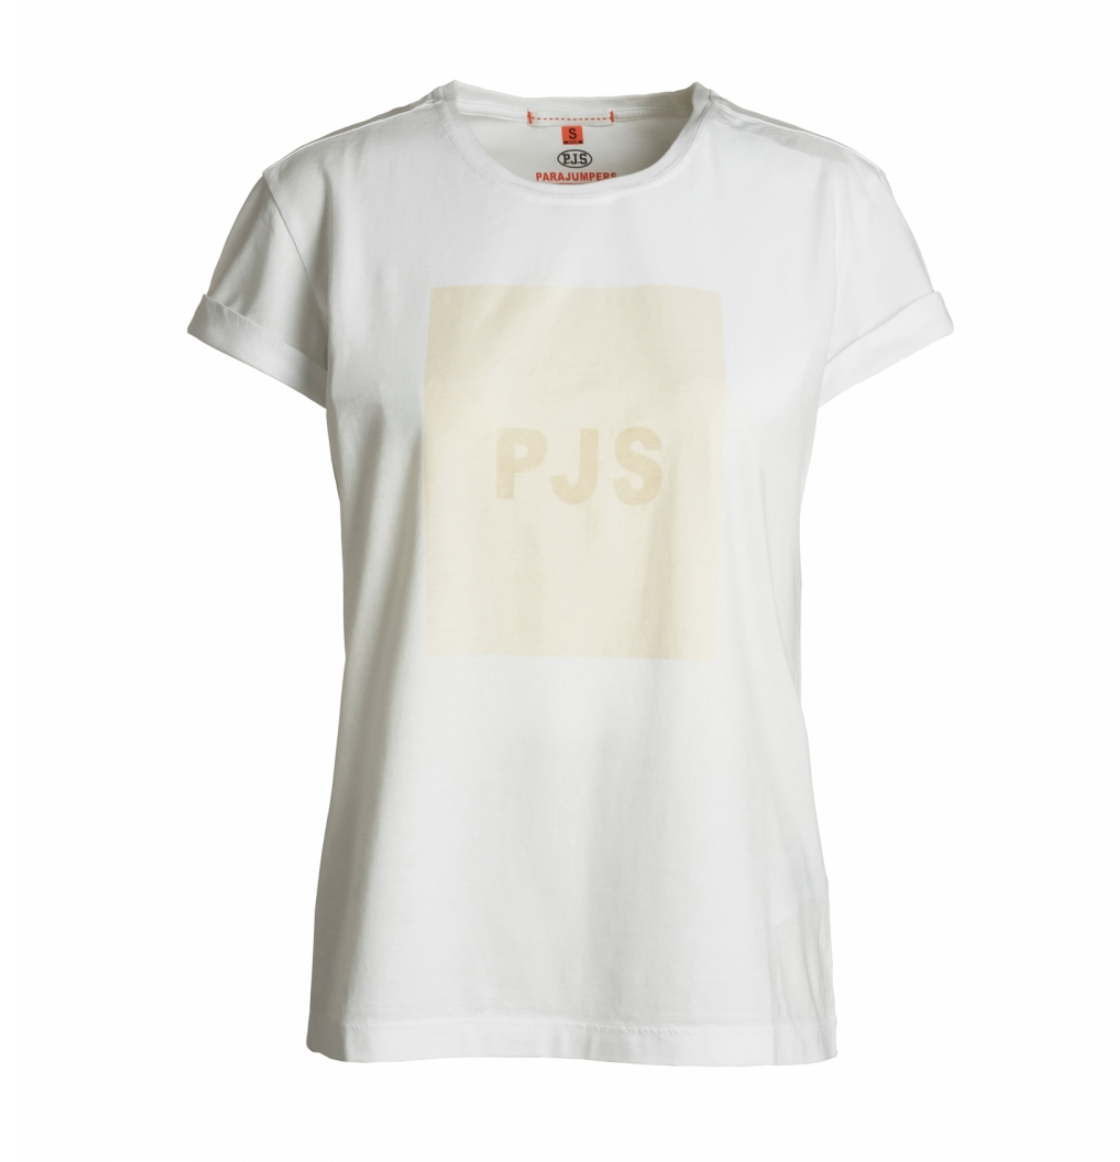 Parajumpers LETA WOMAN T-SHIRT off white 